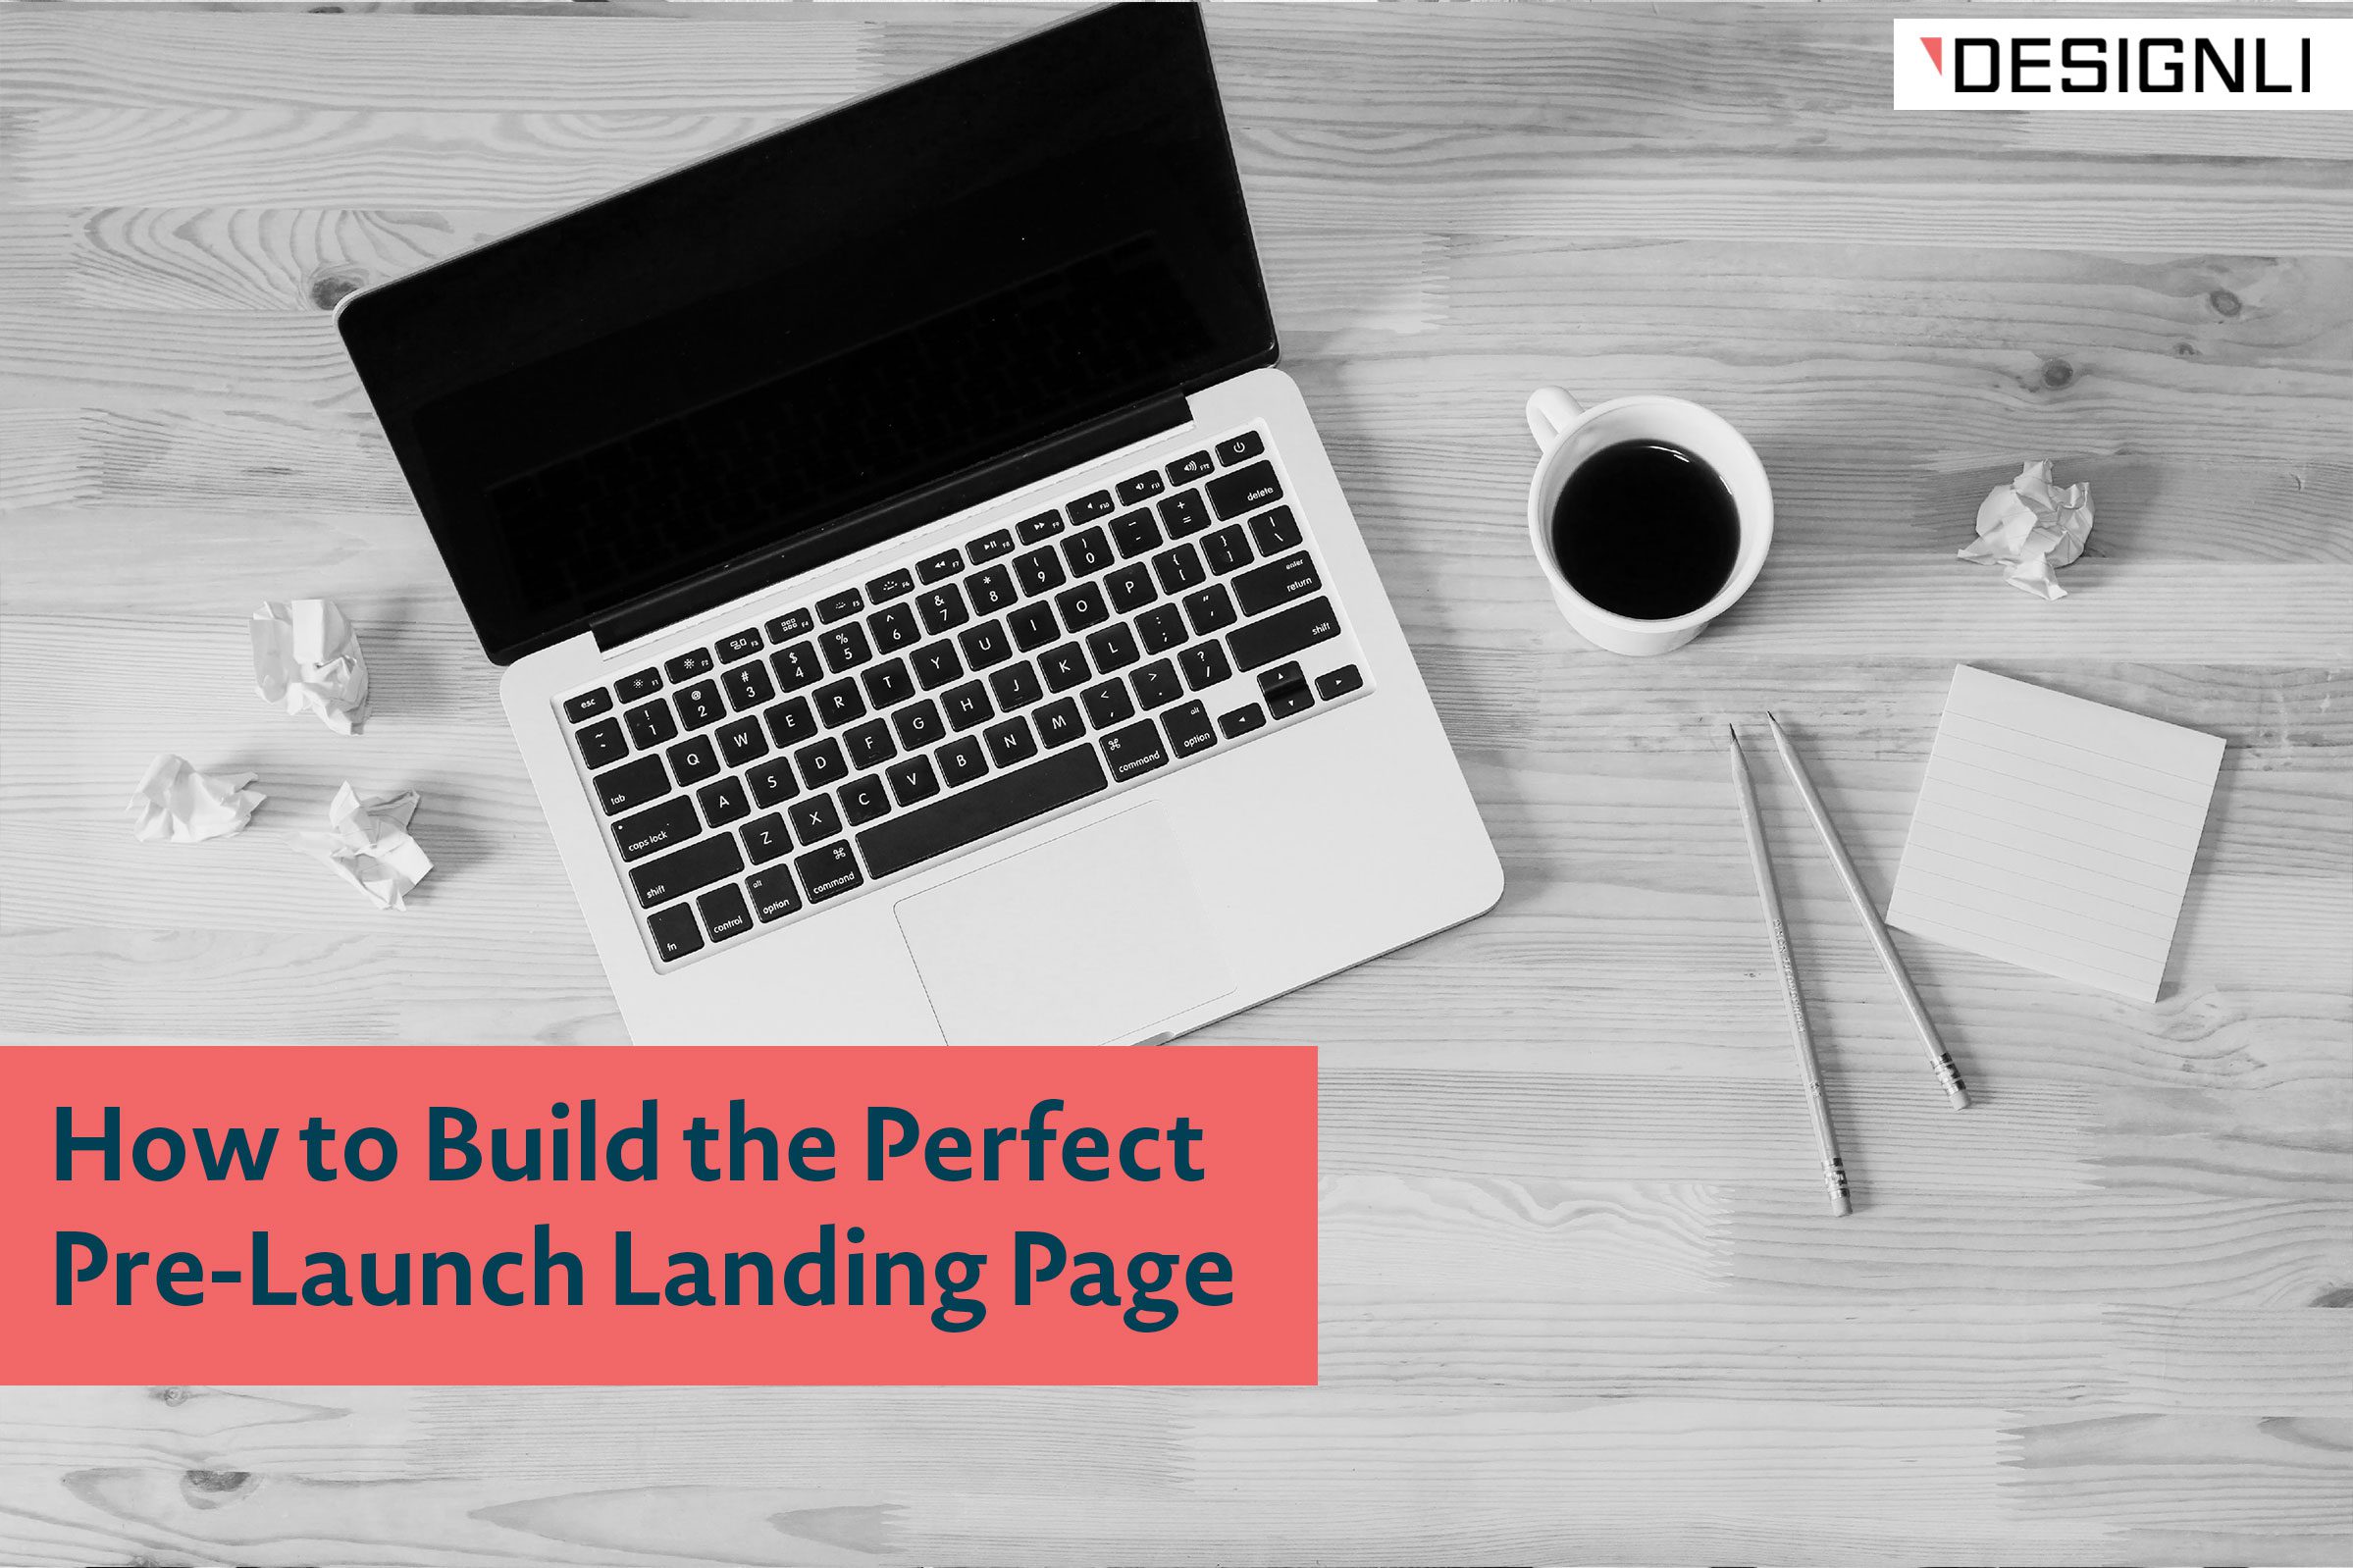 How to Build the Perfect Pre-Launch Landing Page